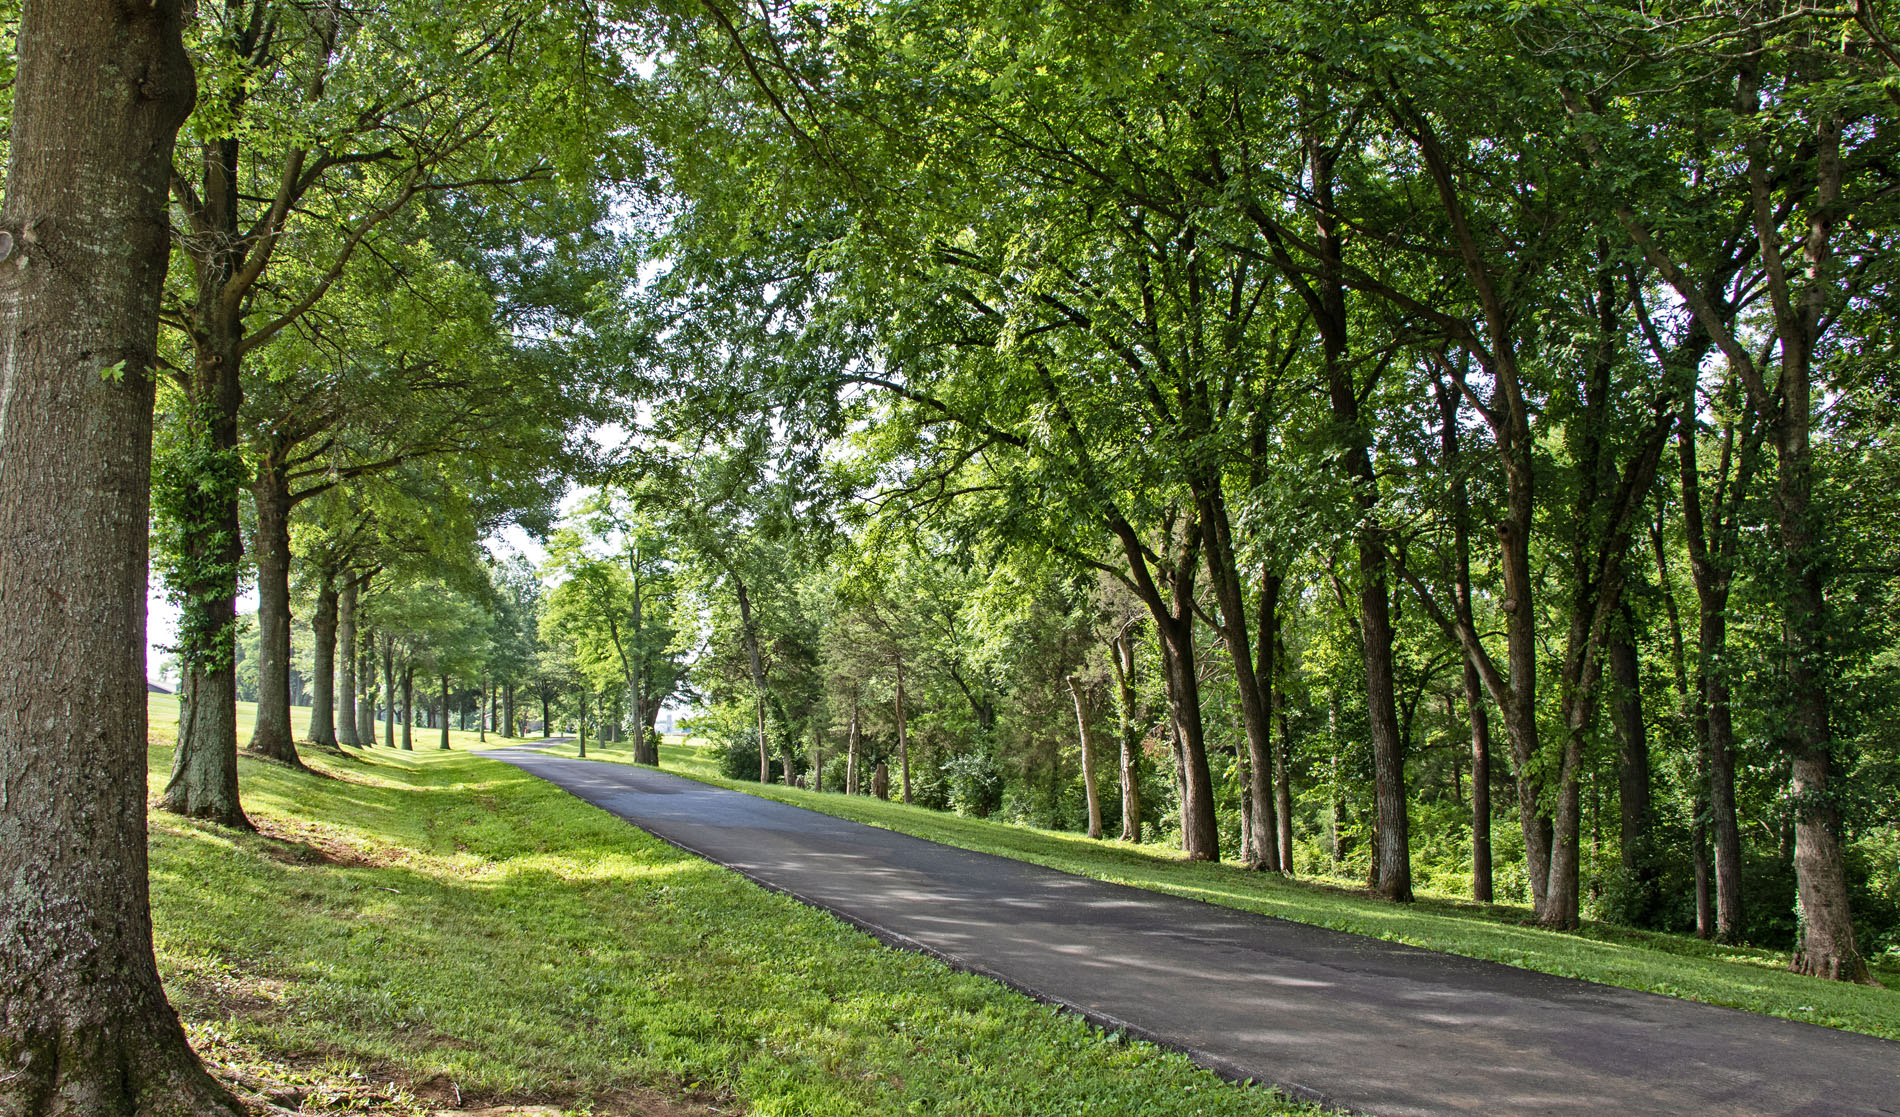 The beautiful tree-lined road leading to Lux Row Distillery